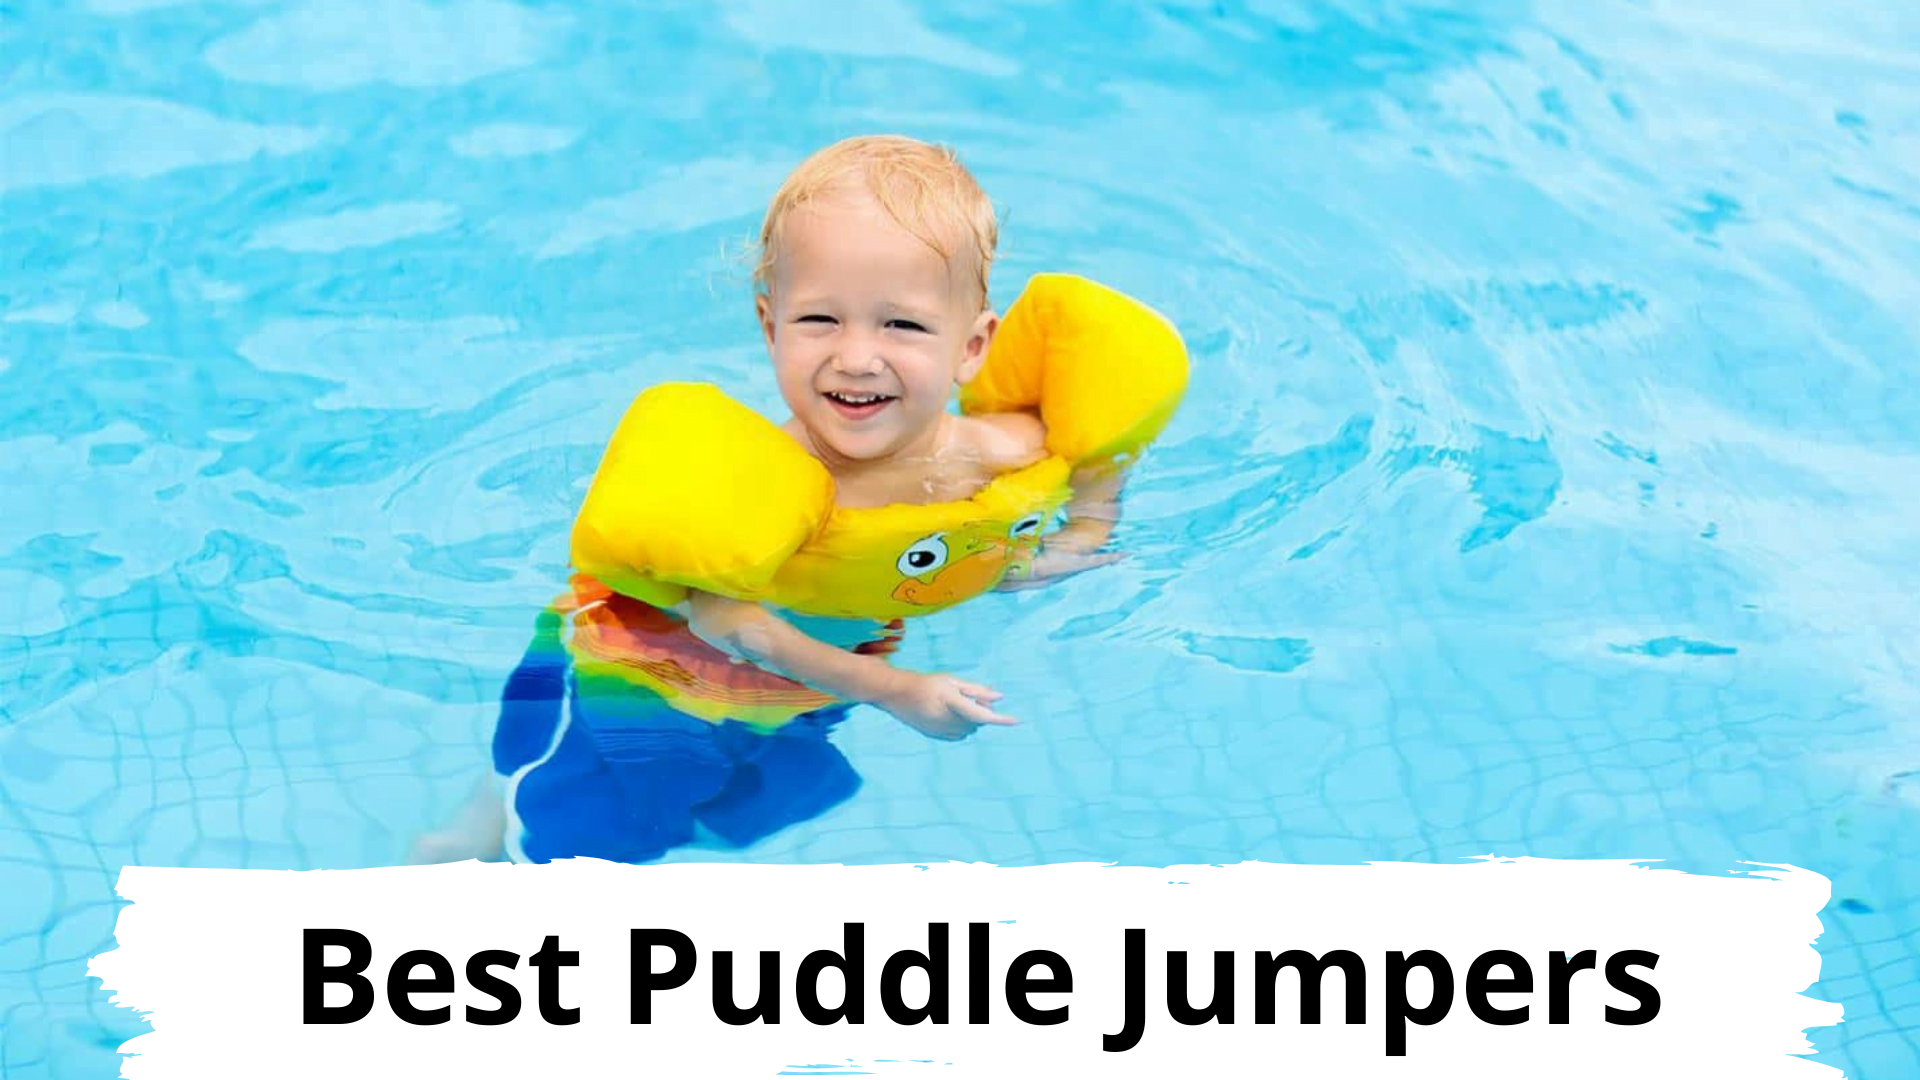 Best Puddle Jumpers